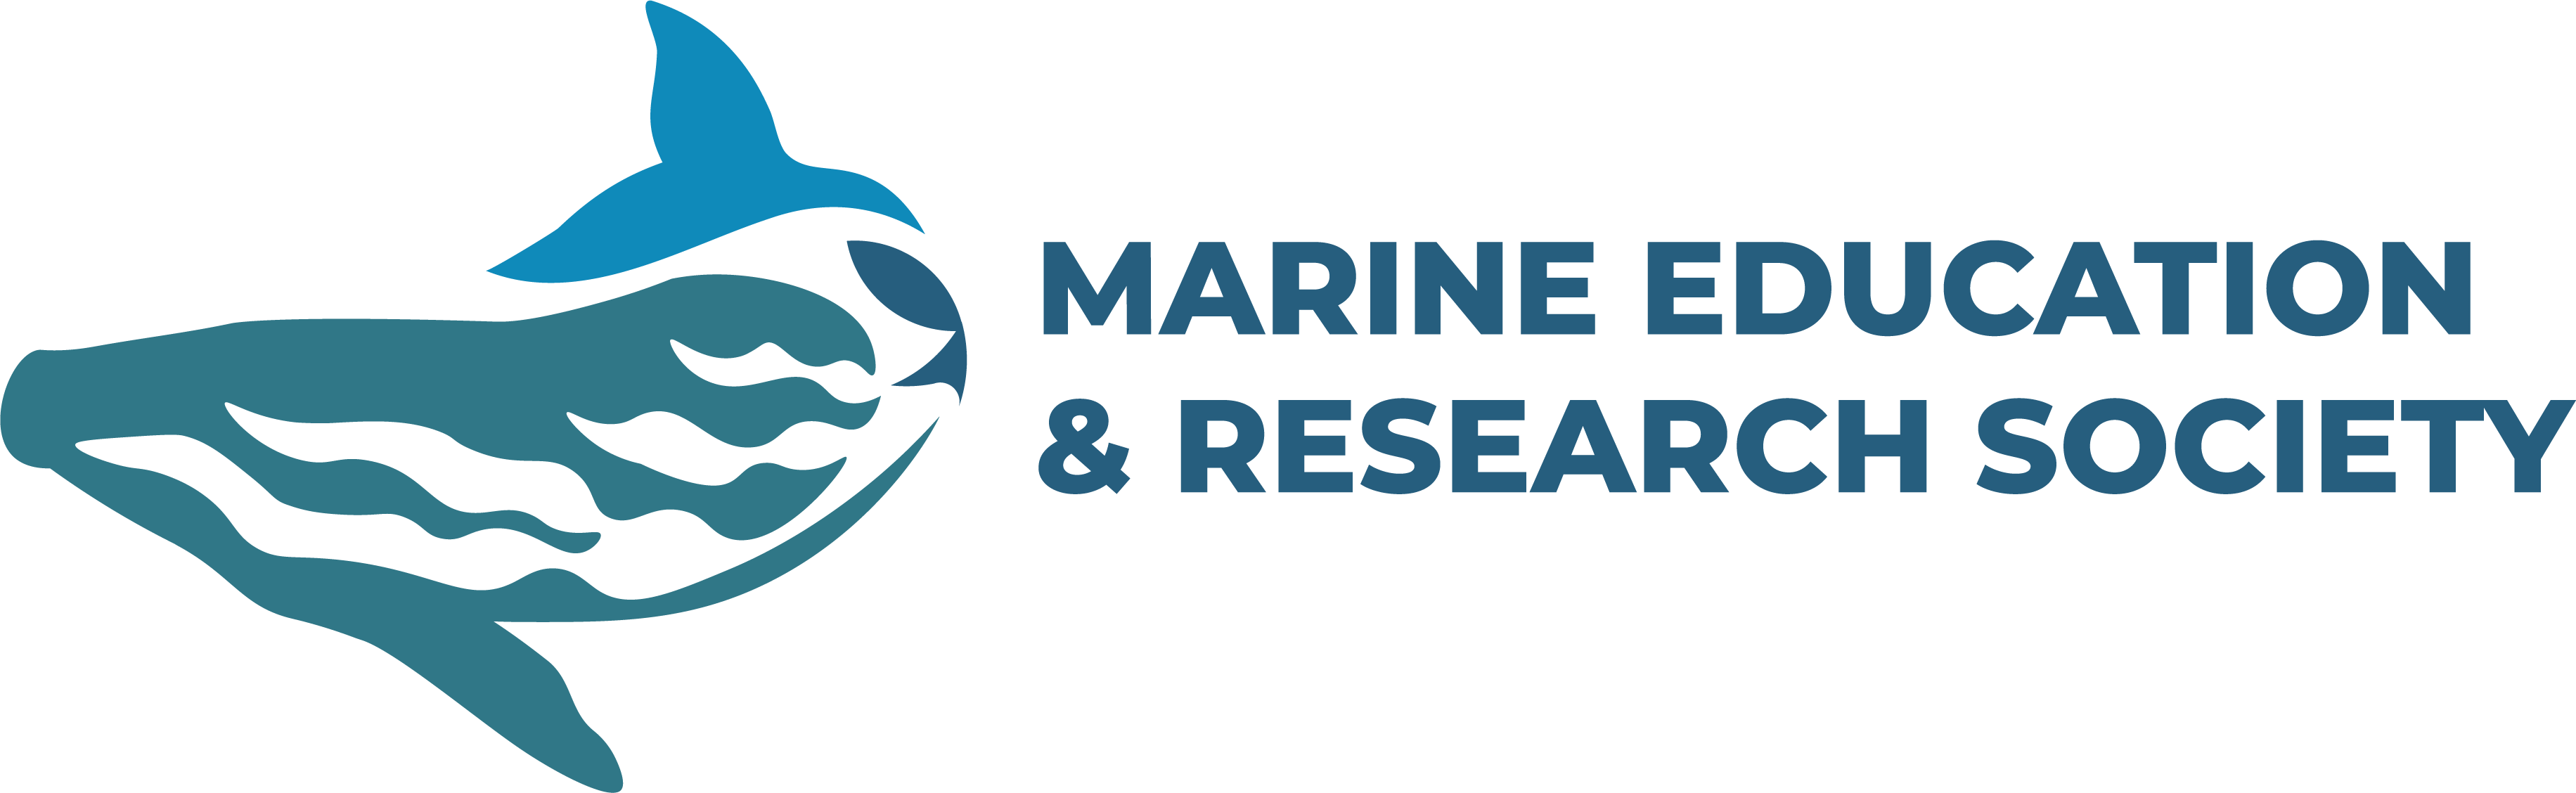 Marine Education and Research Society